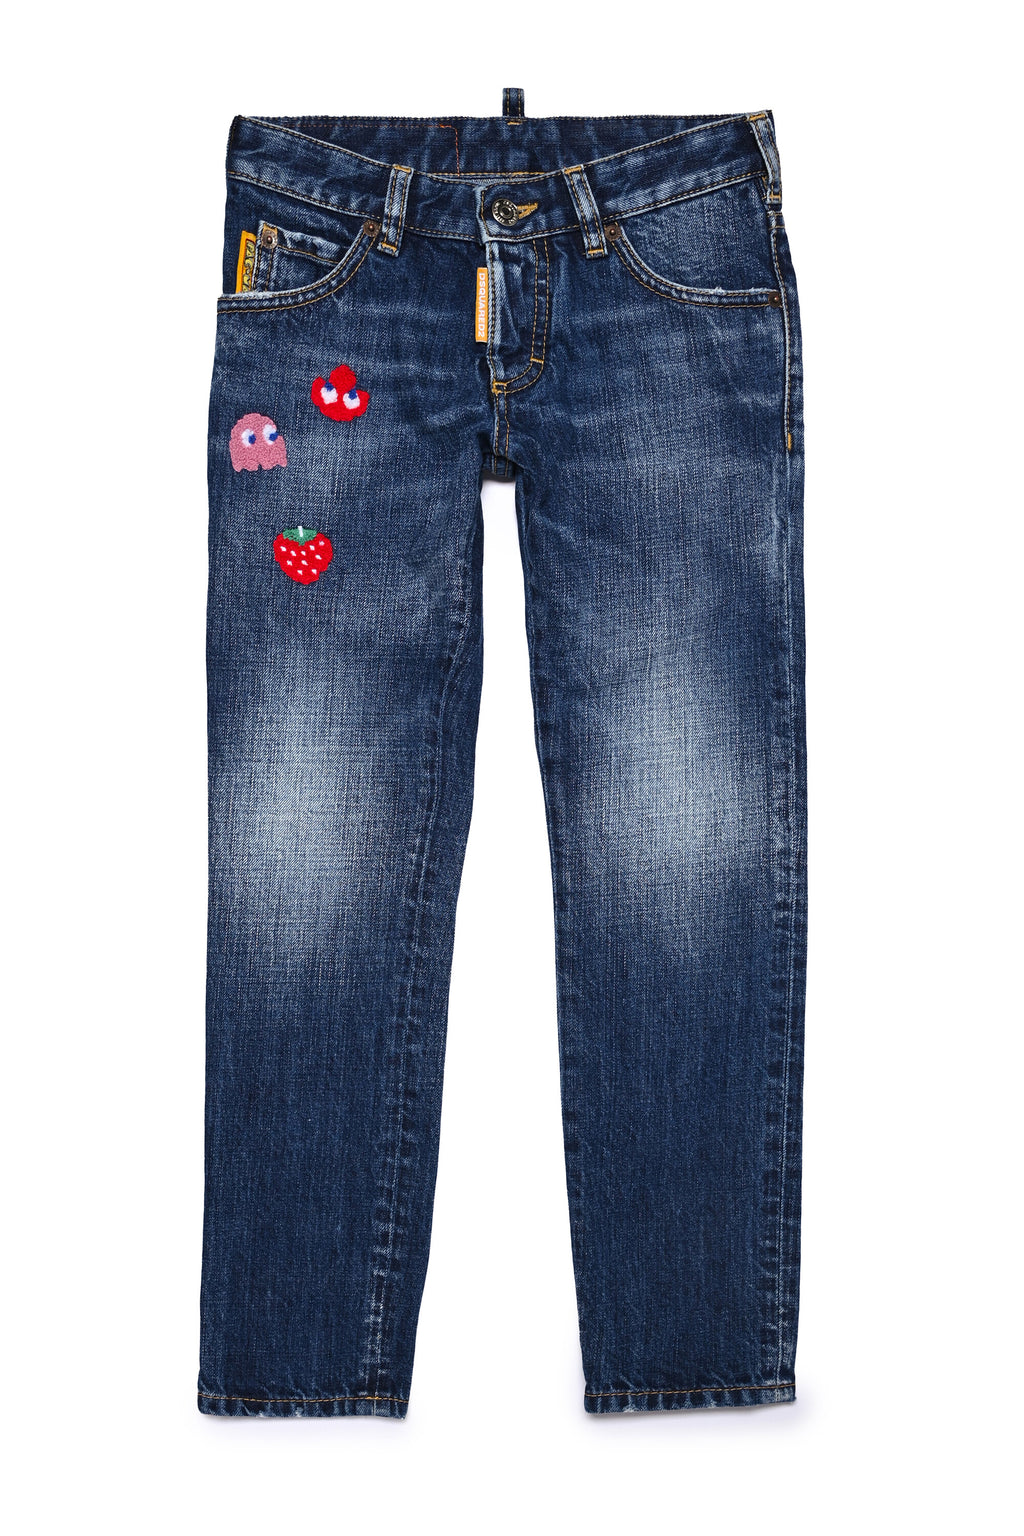 Jeans Clement straight blu medio sfumato con patch Pac-Man